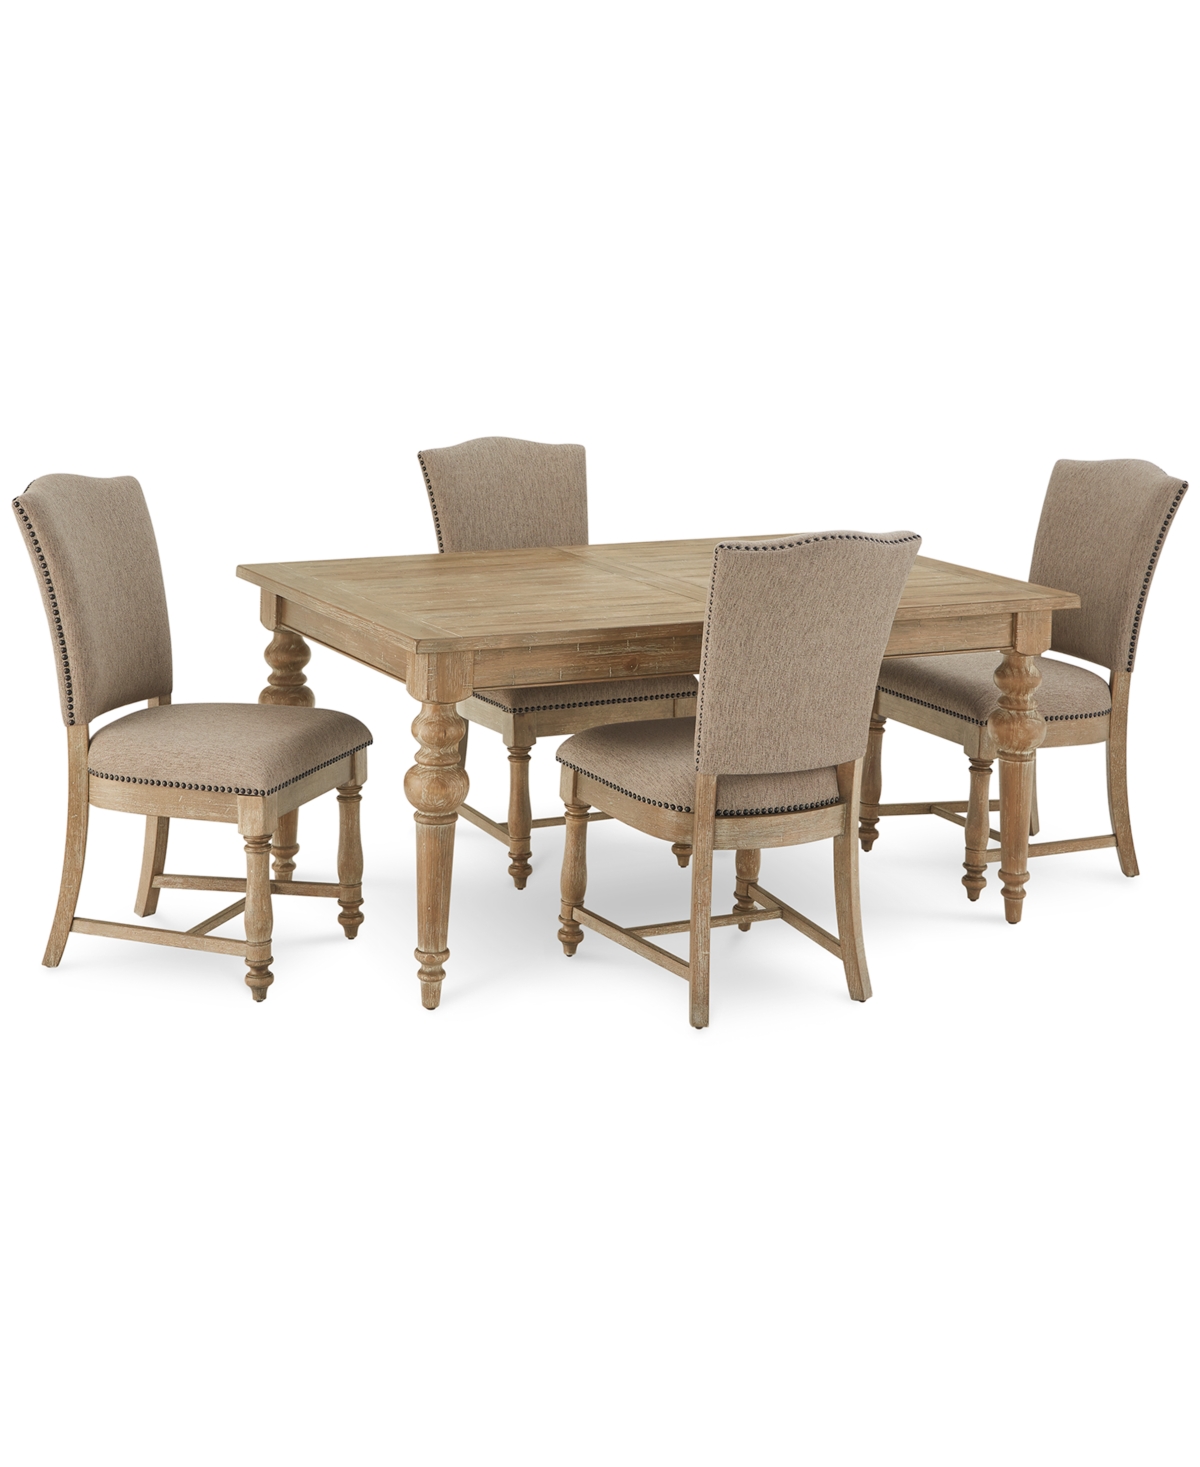 Furniture Sonora 5-pc. Dining Set (rectangular Expandable Table + 4 Upholstered Side Chairs)